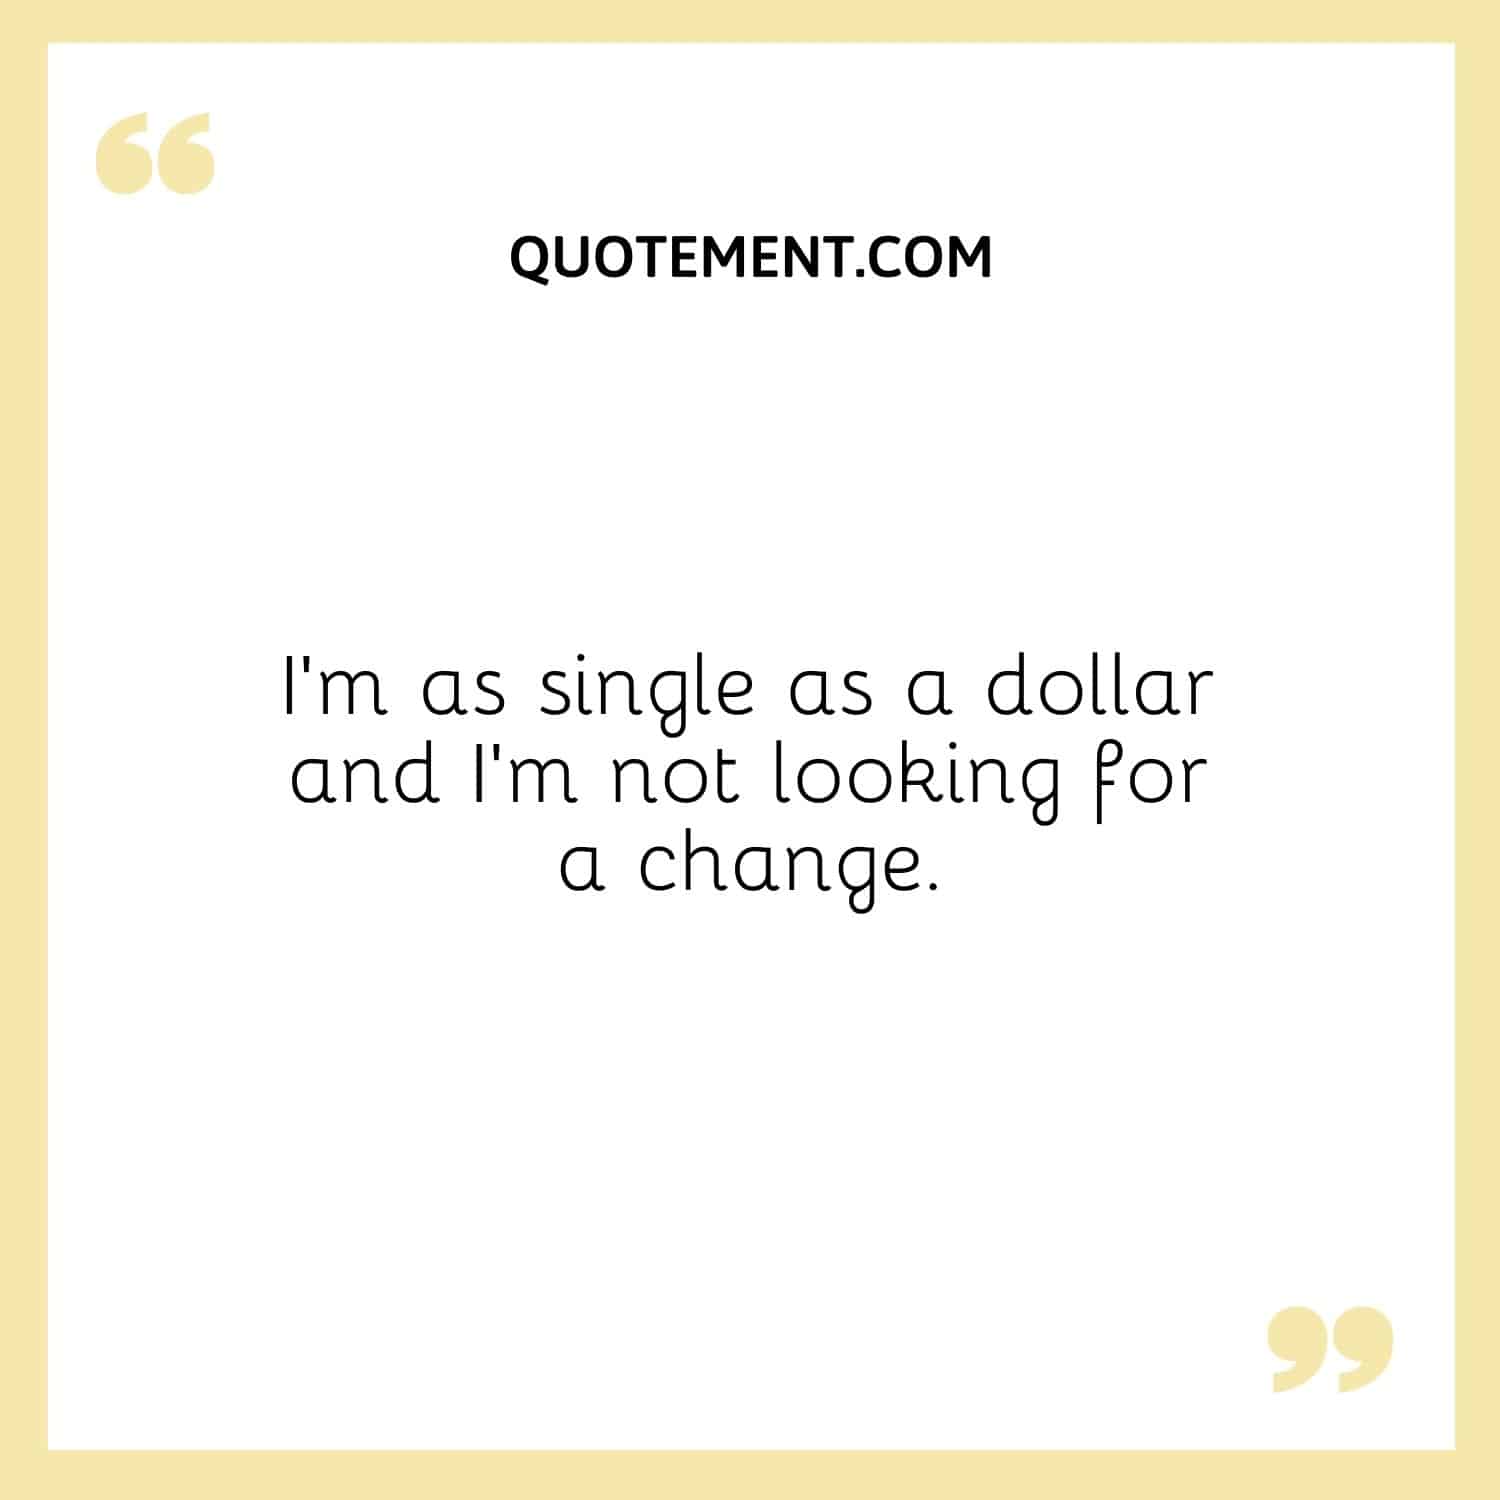 I’m as single as a dollar and I’m not looking for a change.